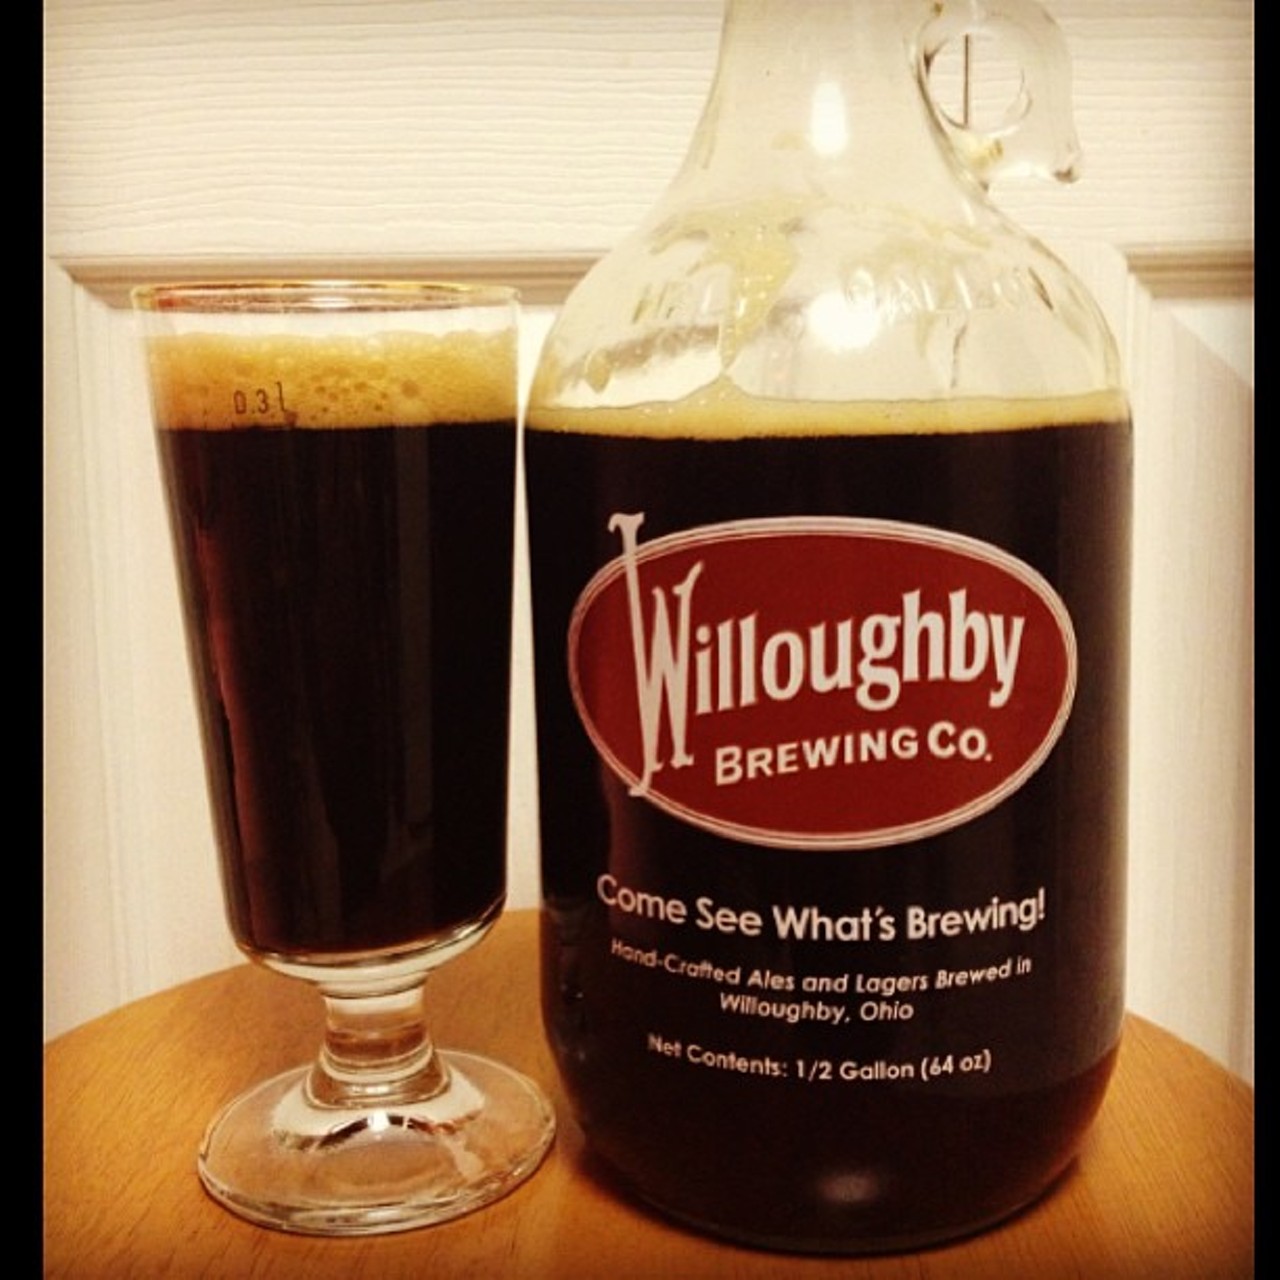 Willoughby Brewing Company brings glad tidings and a brown ale with Wenceslas, which has a "rich malt character" and an assortment of spices. It also will have you reaching for Wikipedia, where you'll learn Good King Wenceslas gave alms to the poor. Willoughby is happy enough just giving you beer.